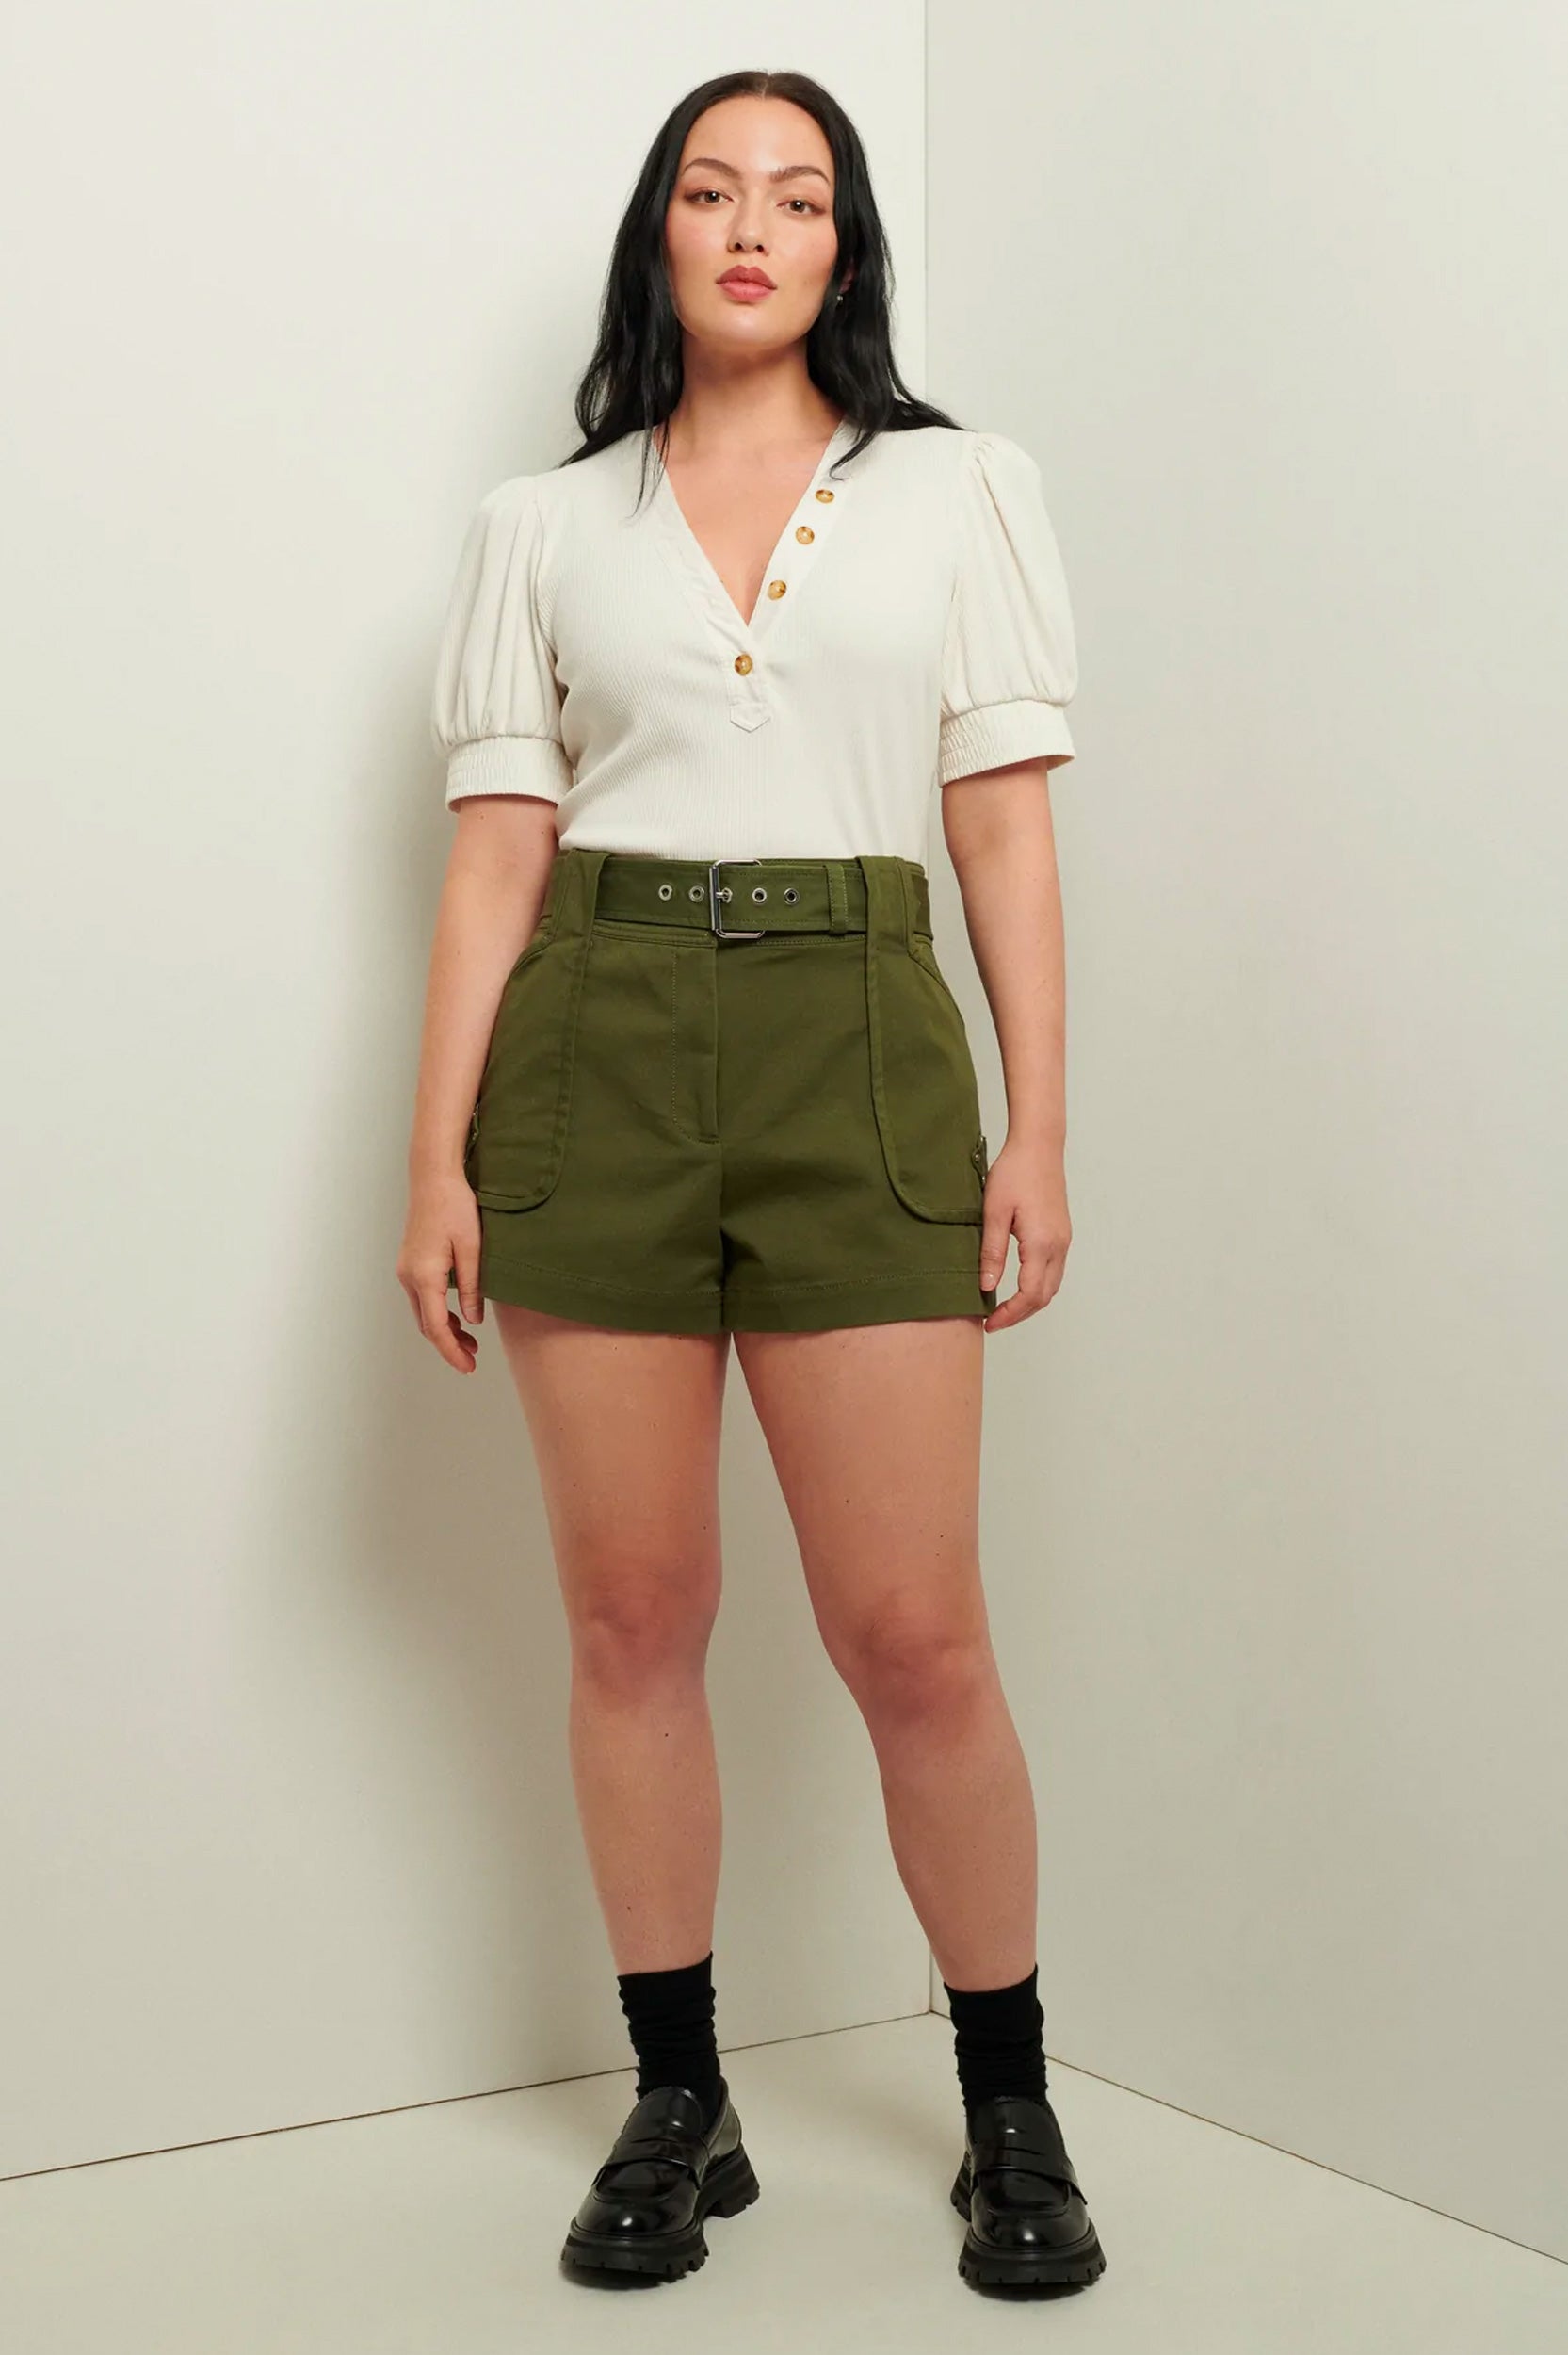 Montery Belted Short in Fatigue